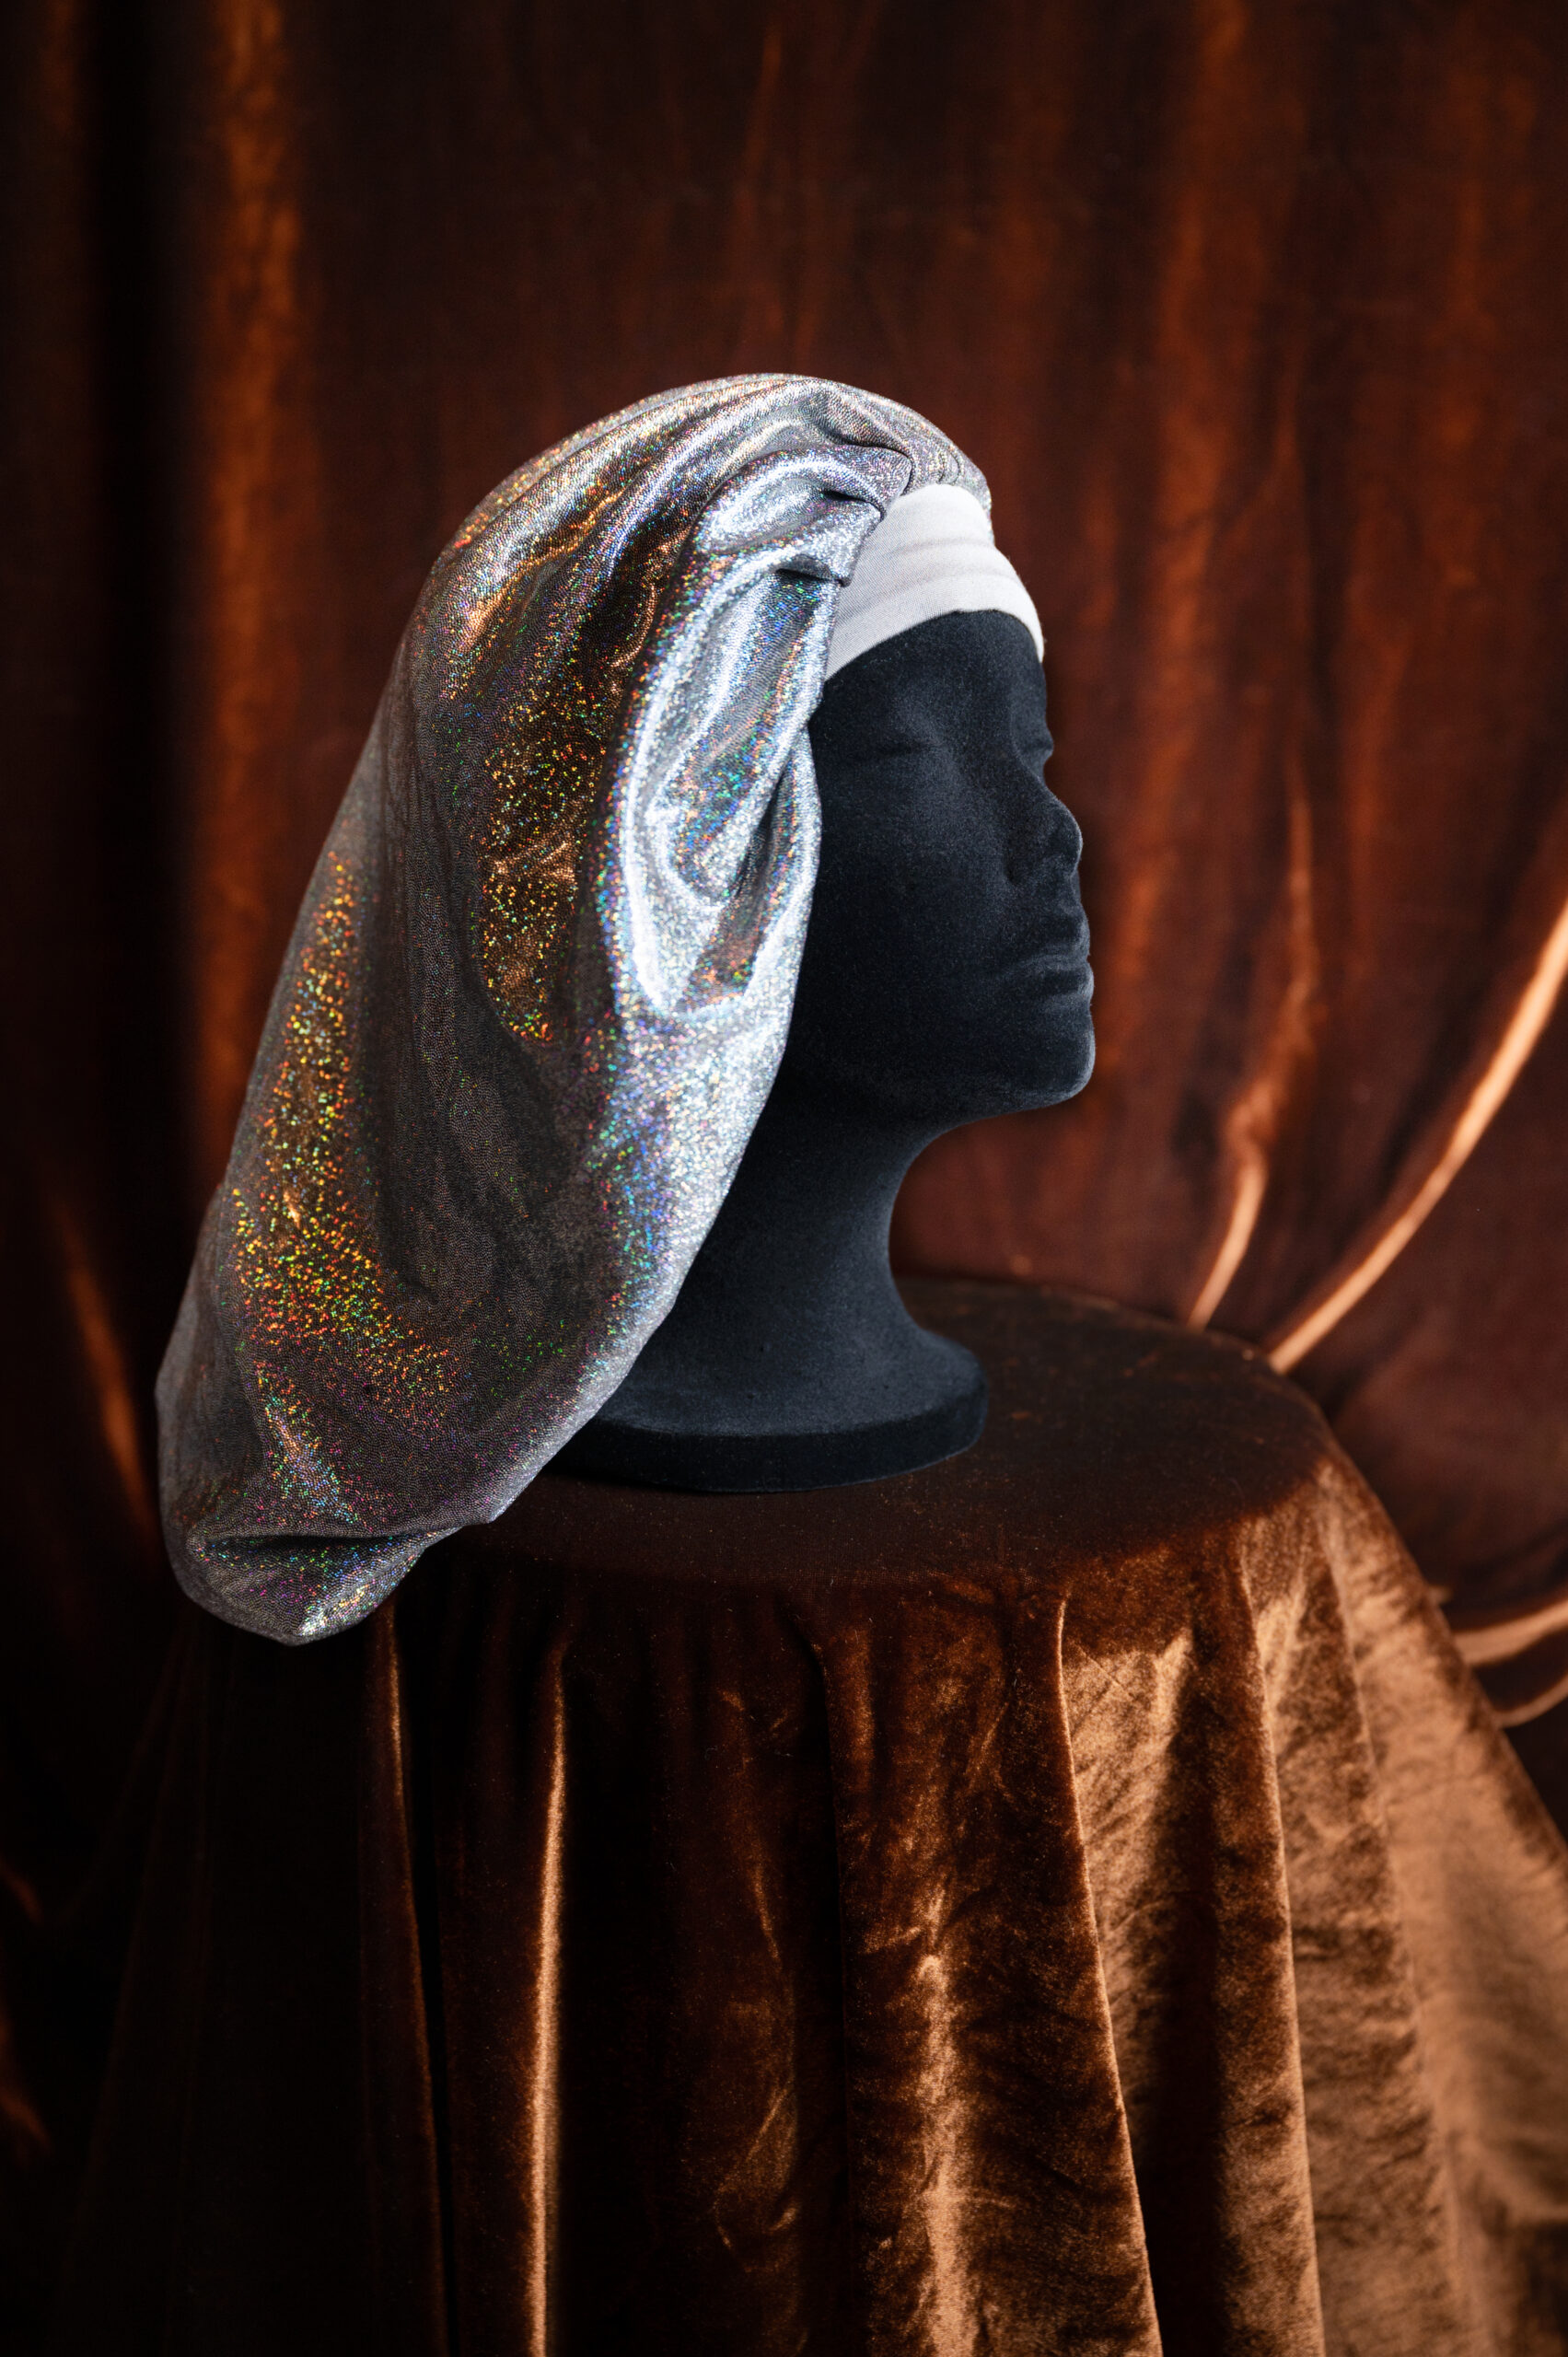 A mannequin head wearing a bonnet made from shimmery silver blue fabric.